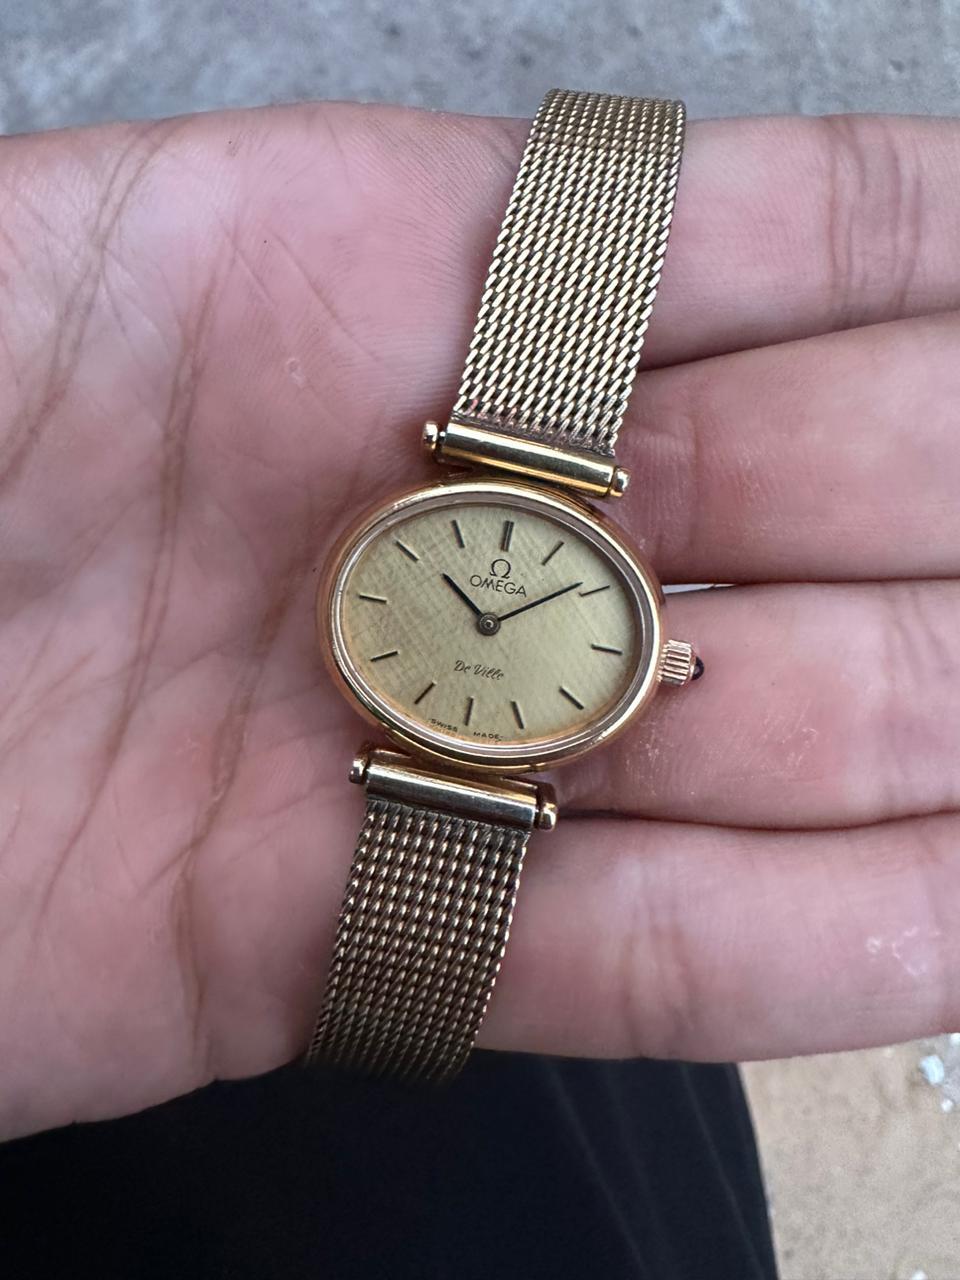 Brand: Omega

Model: De Ville

Country Of Manufacture: Switzerland

Movement: Manual Winding 

Case Material: Gold Plated Stainless steel

Measurements : Case width: 25 mm. (without crown)

Band Type : Gold Plated Stainless steel

Band Condition :